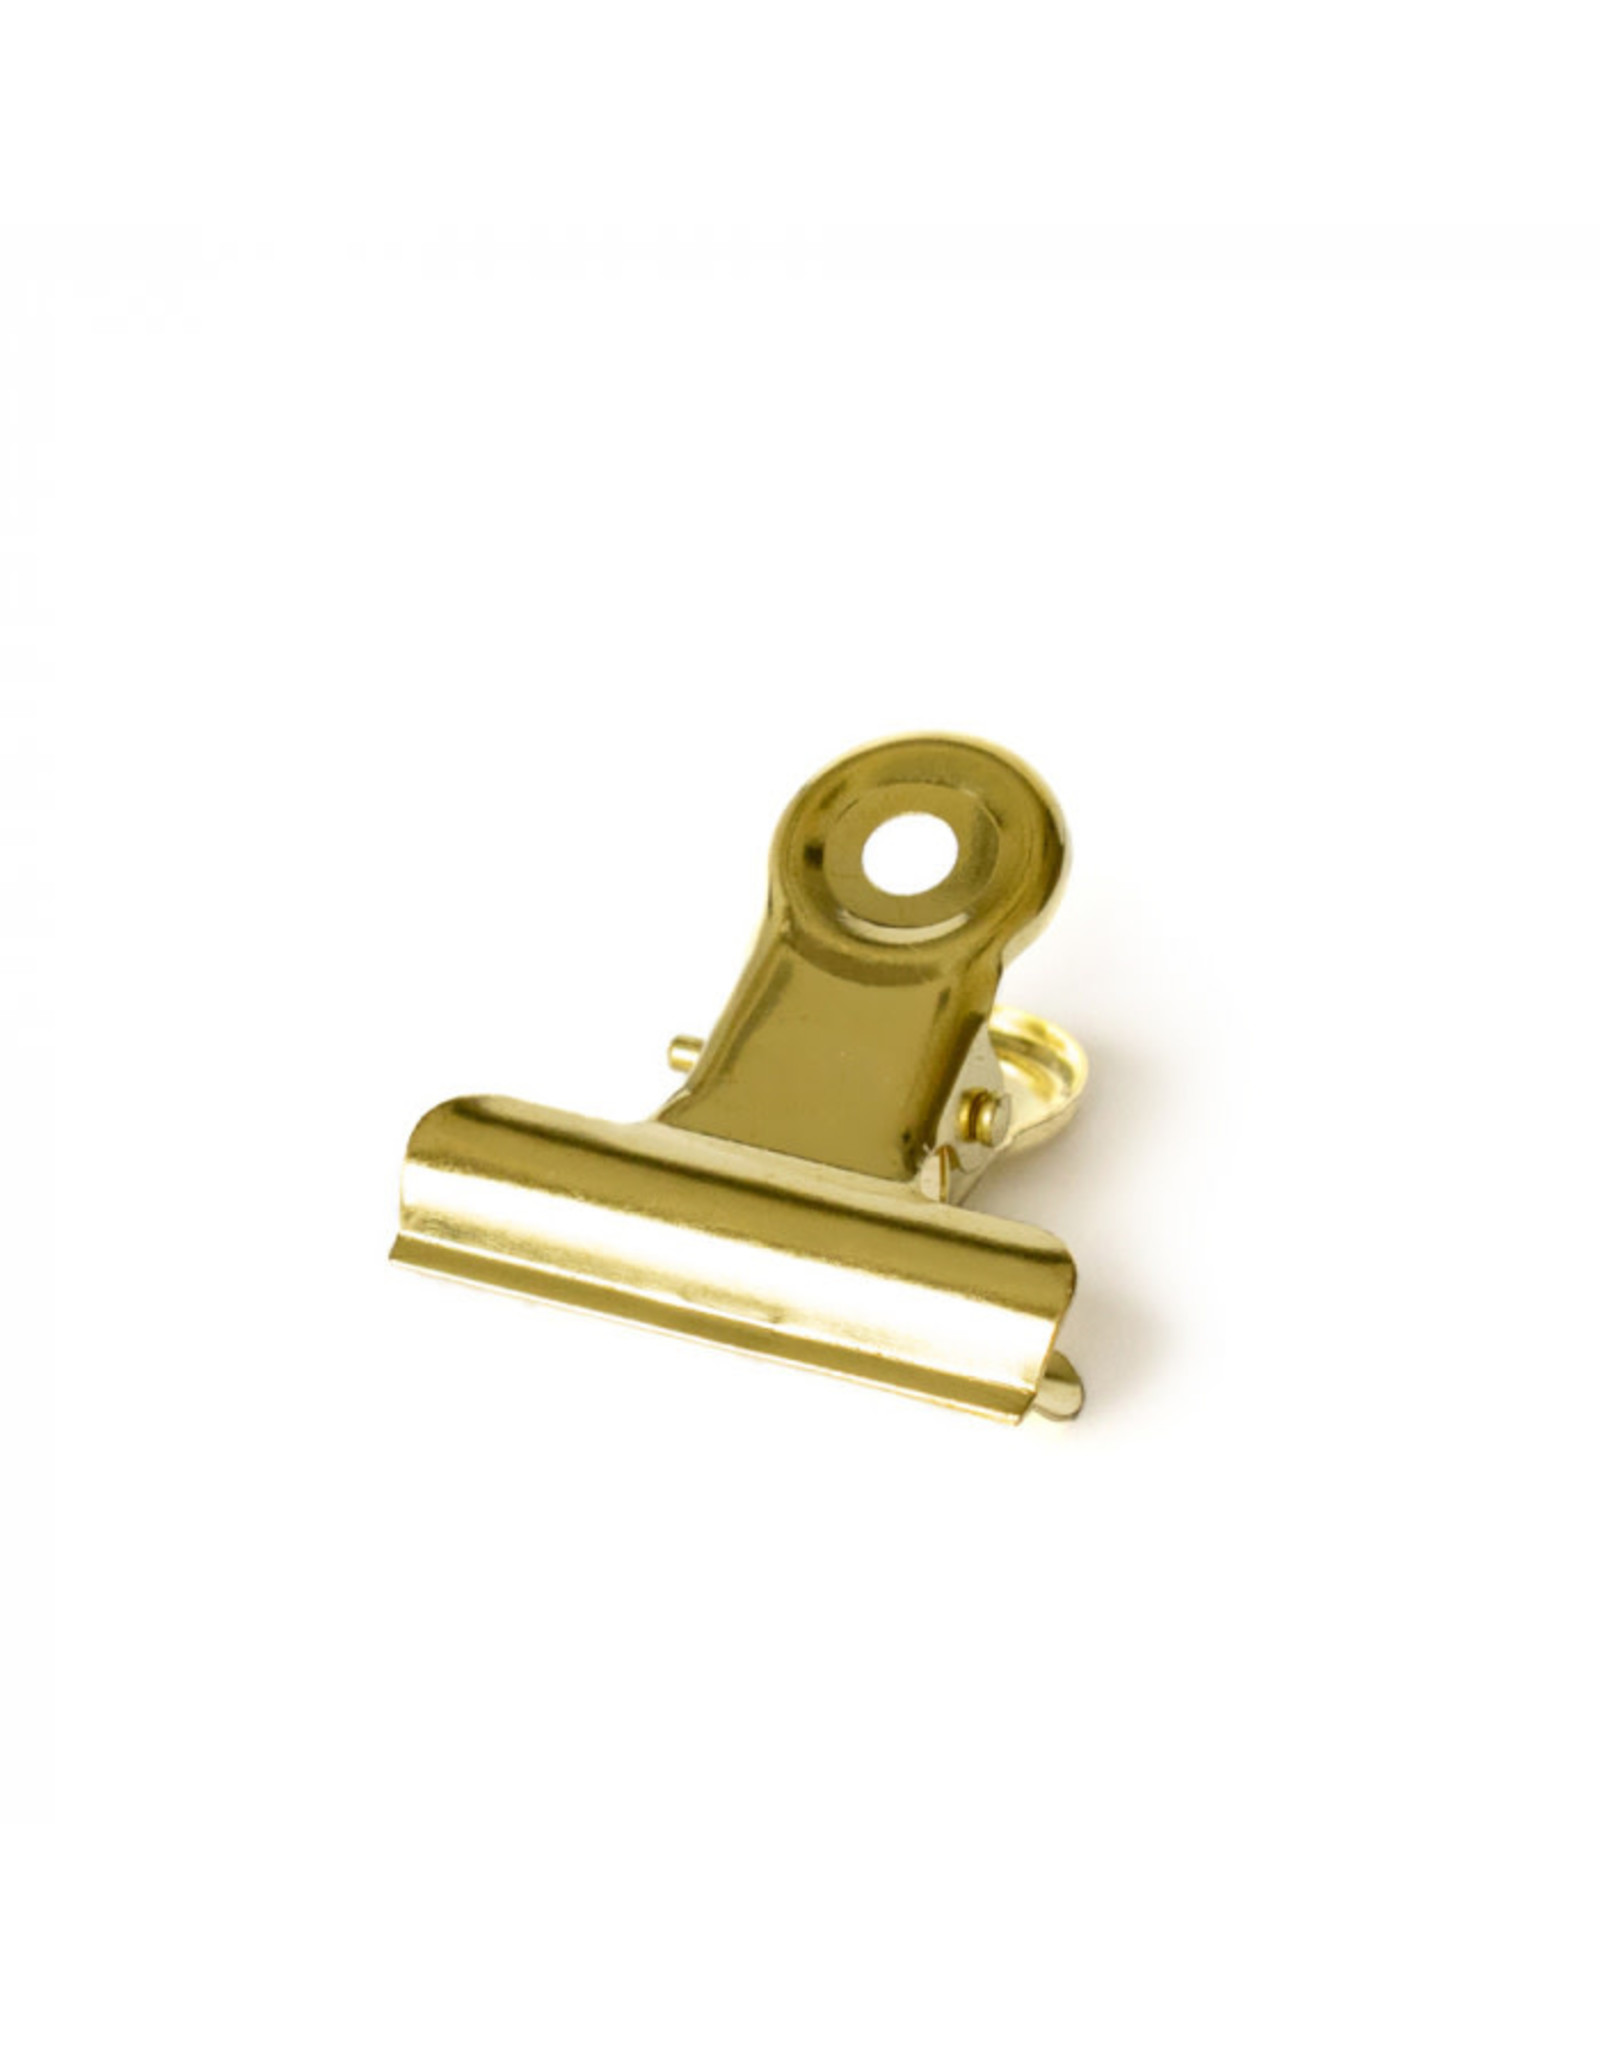 House of products Knijpers - Goud - 30mm x 30mm